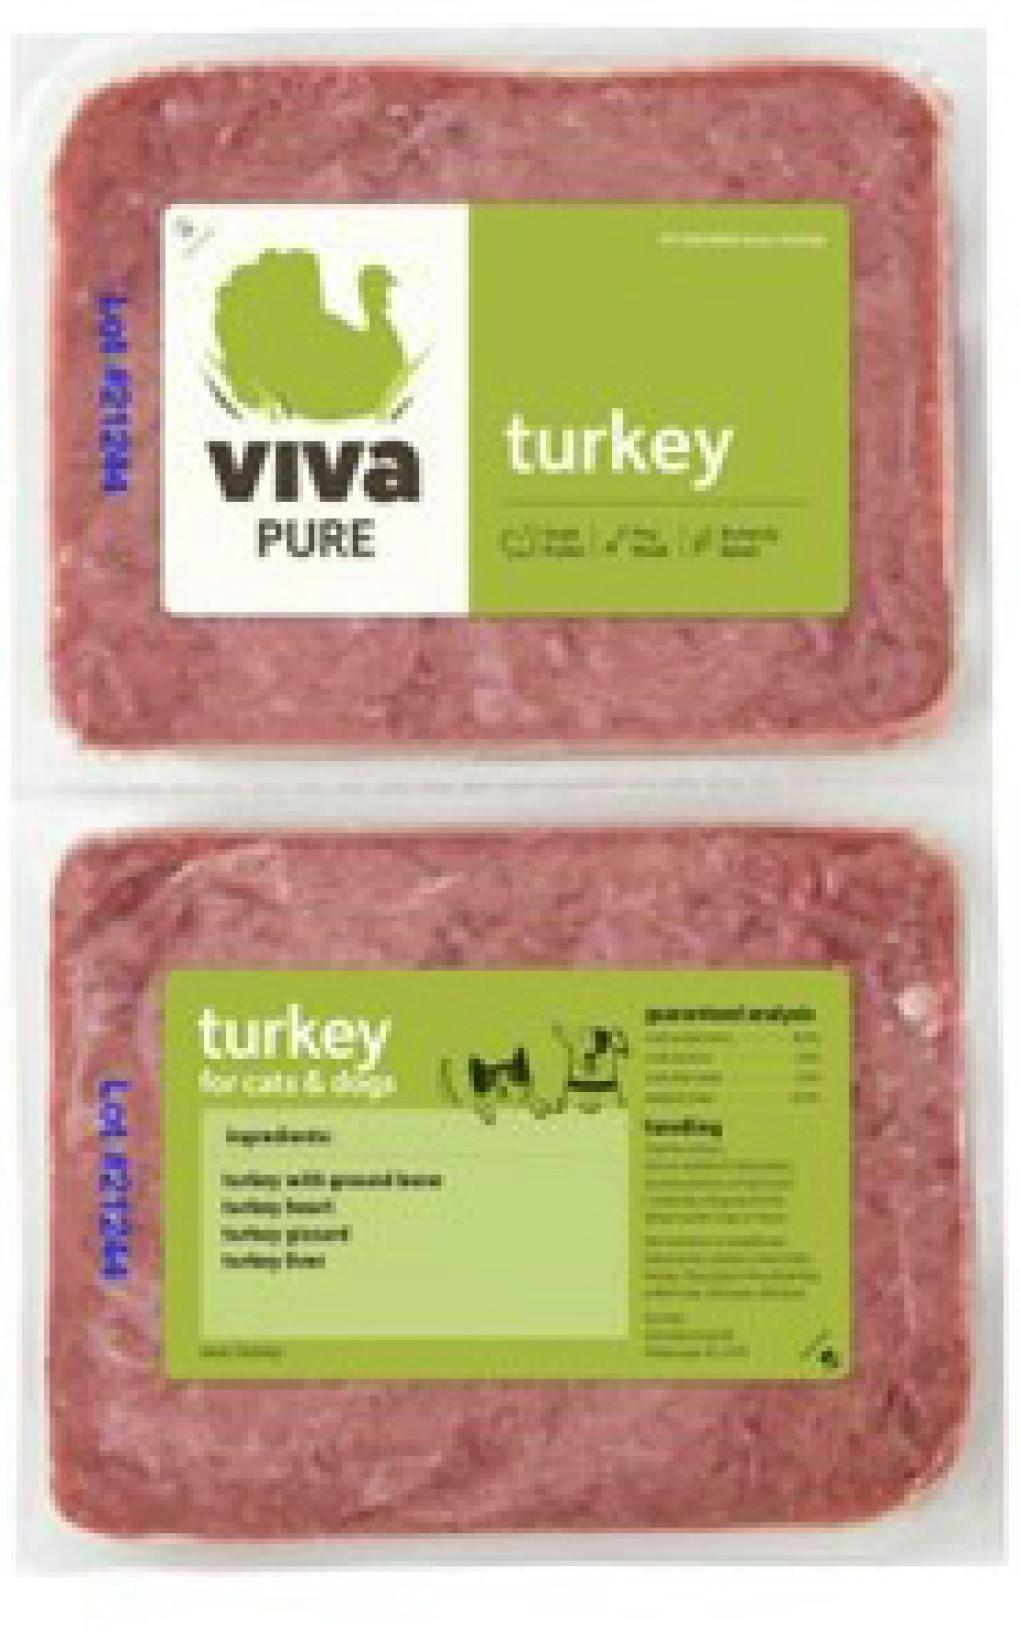 One of the recalled products from Viva Raw. (Photo courtesy of the FDA)